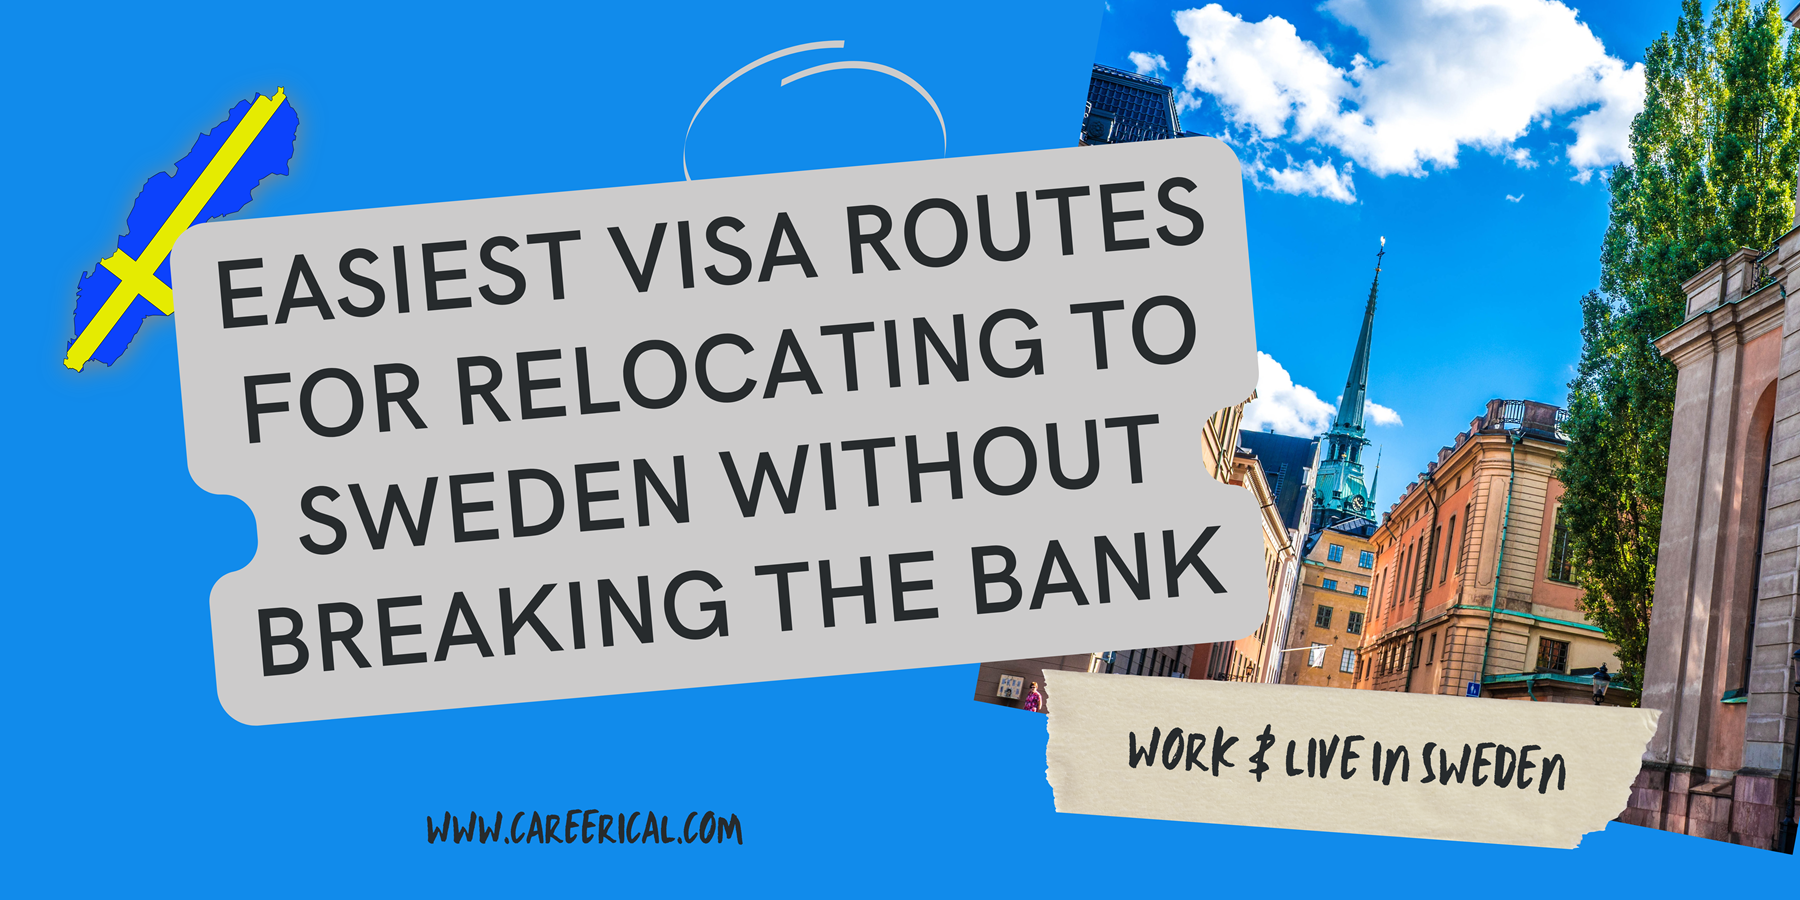 Easiest Visa Routes for Relocating to Sweden Without Breaking the Bank